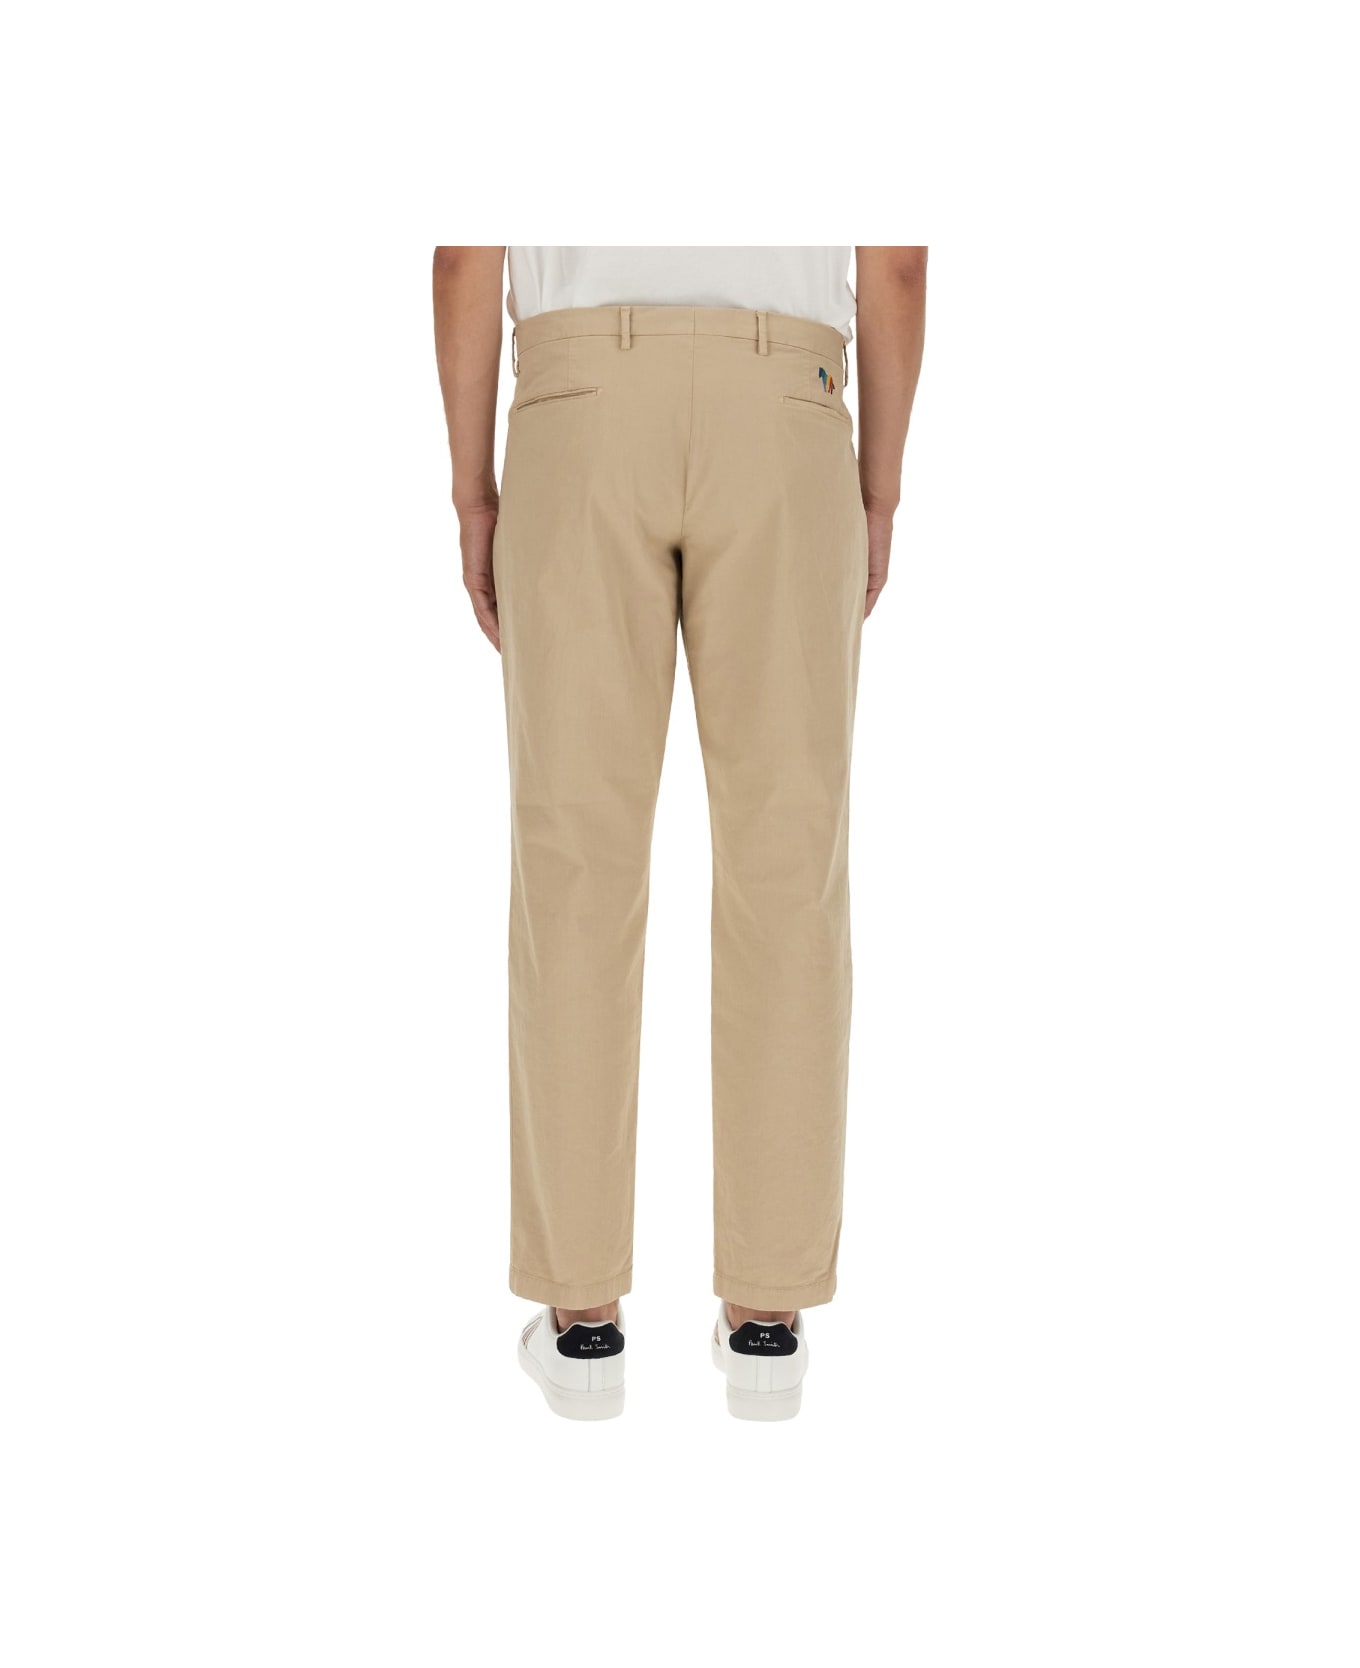 PS by Paul Smith Regular Fit Pants - BEIGE